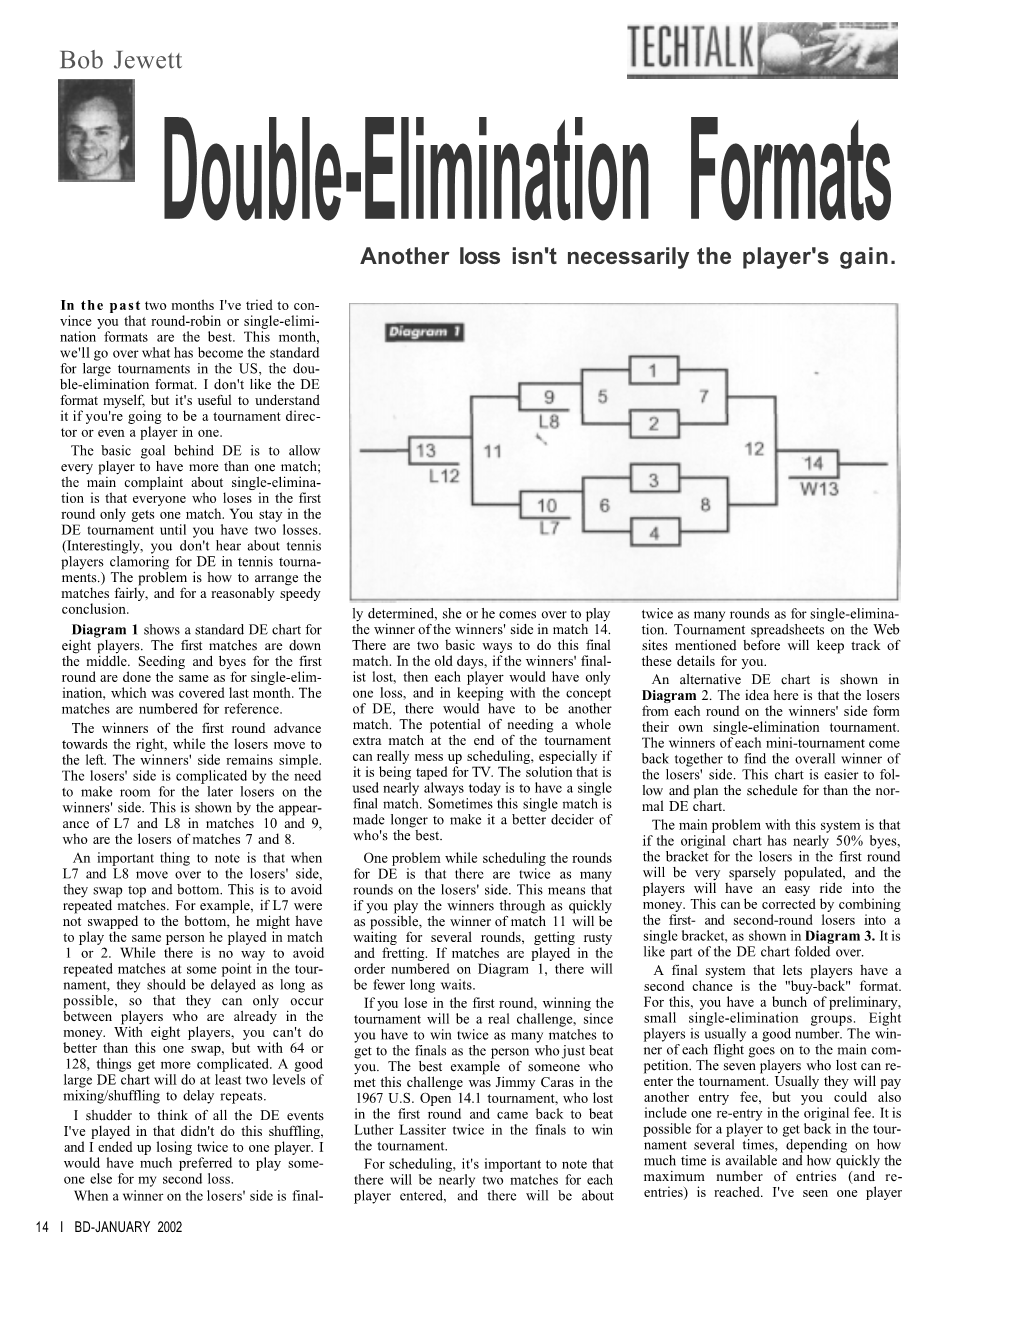 Bob Jewett Double-Elimination Formats Another Loss Isn't Necessarily the Player's Gain